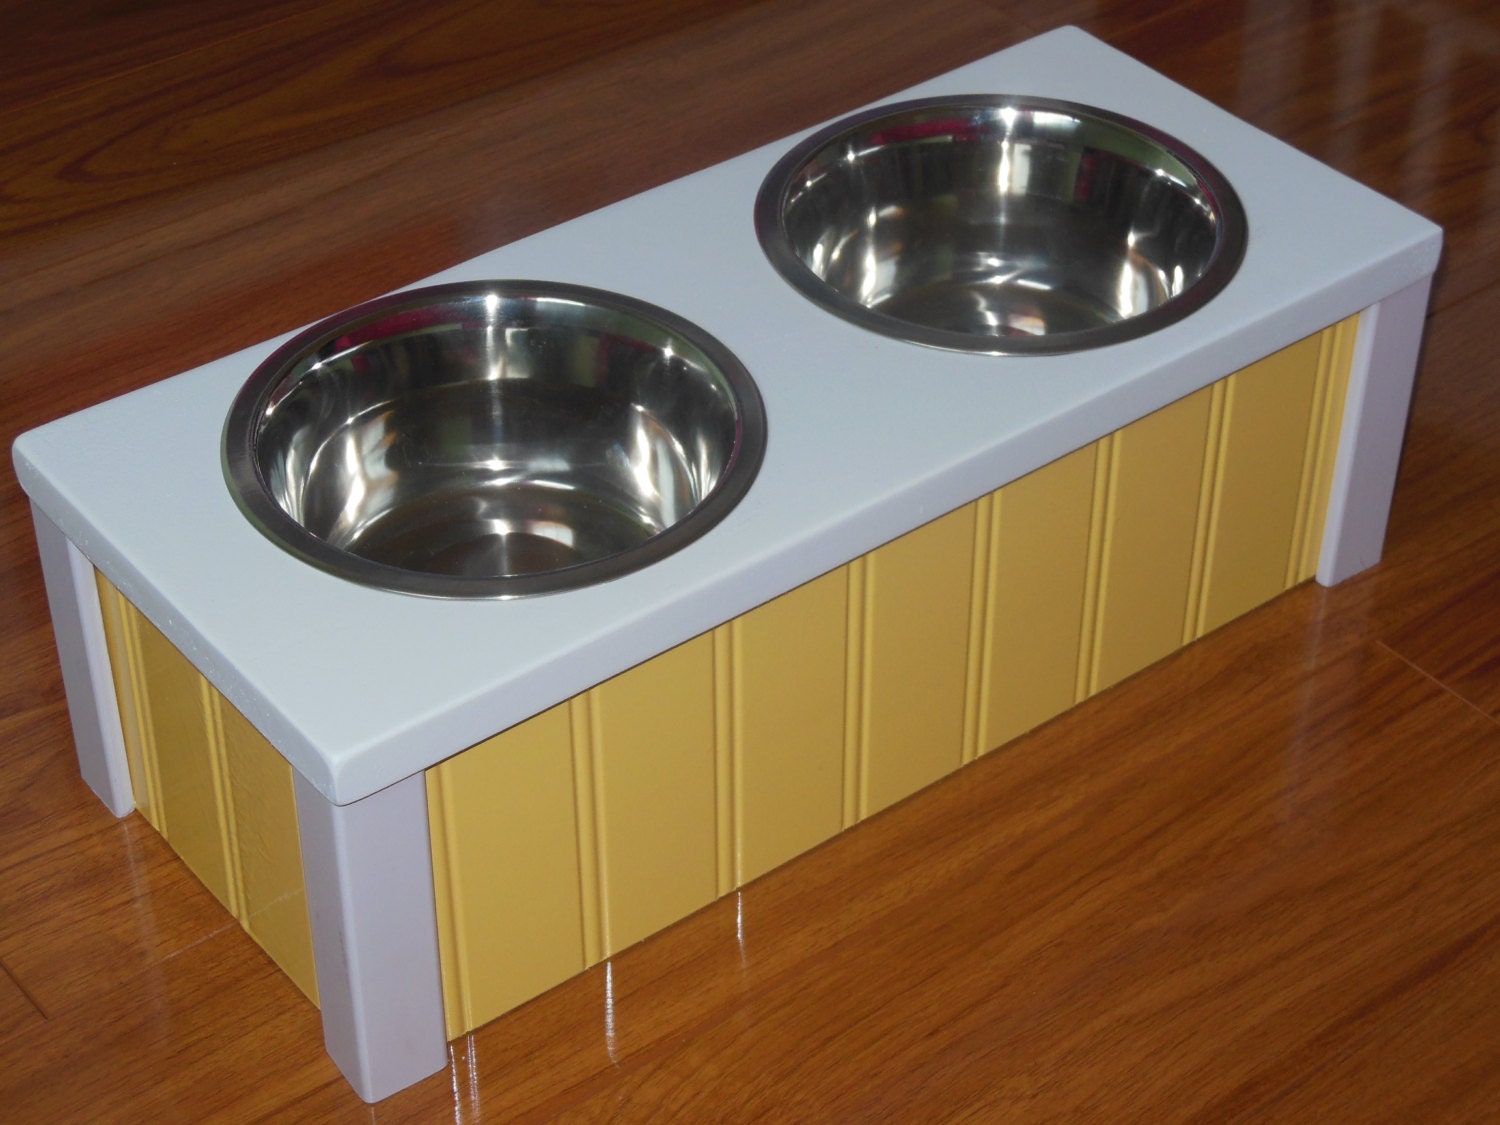 6 High Elevated Pet Feeder These Raised Dog Feeders and